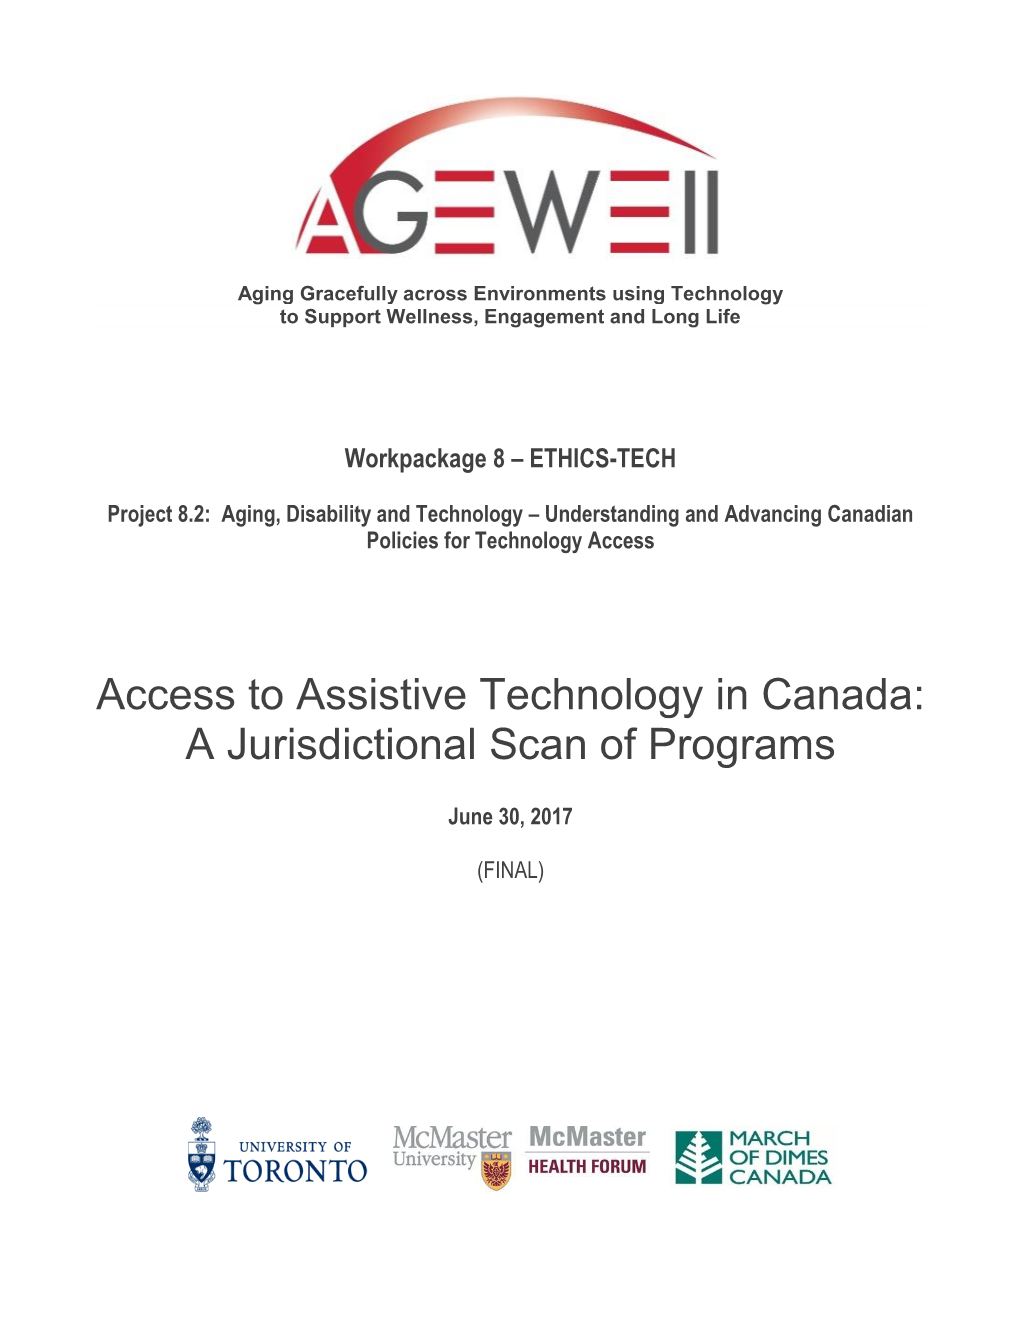 Access to Assistive Technology in Canada: a Jurisdictional Scan of Programs